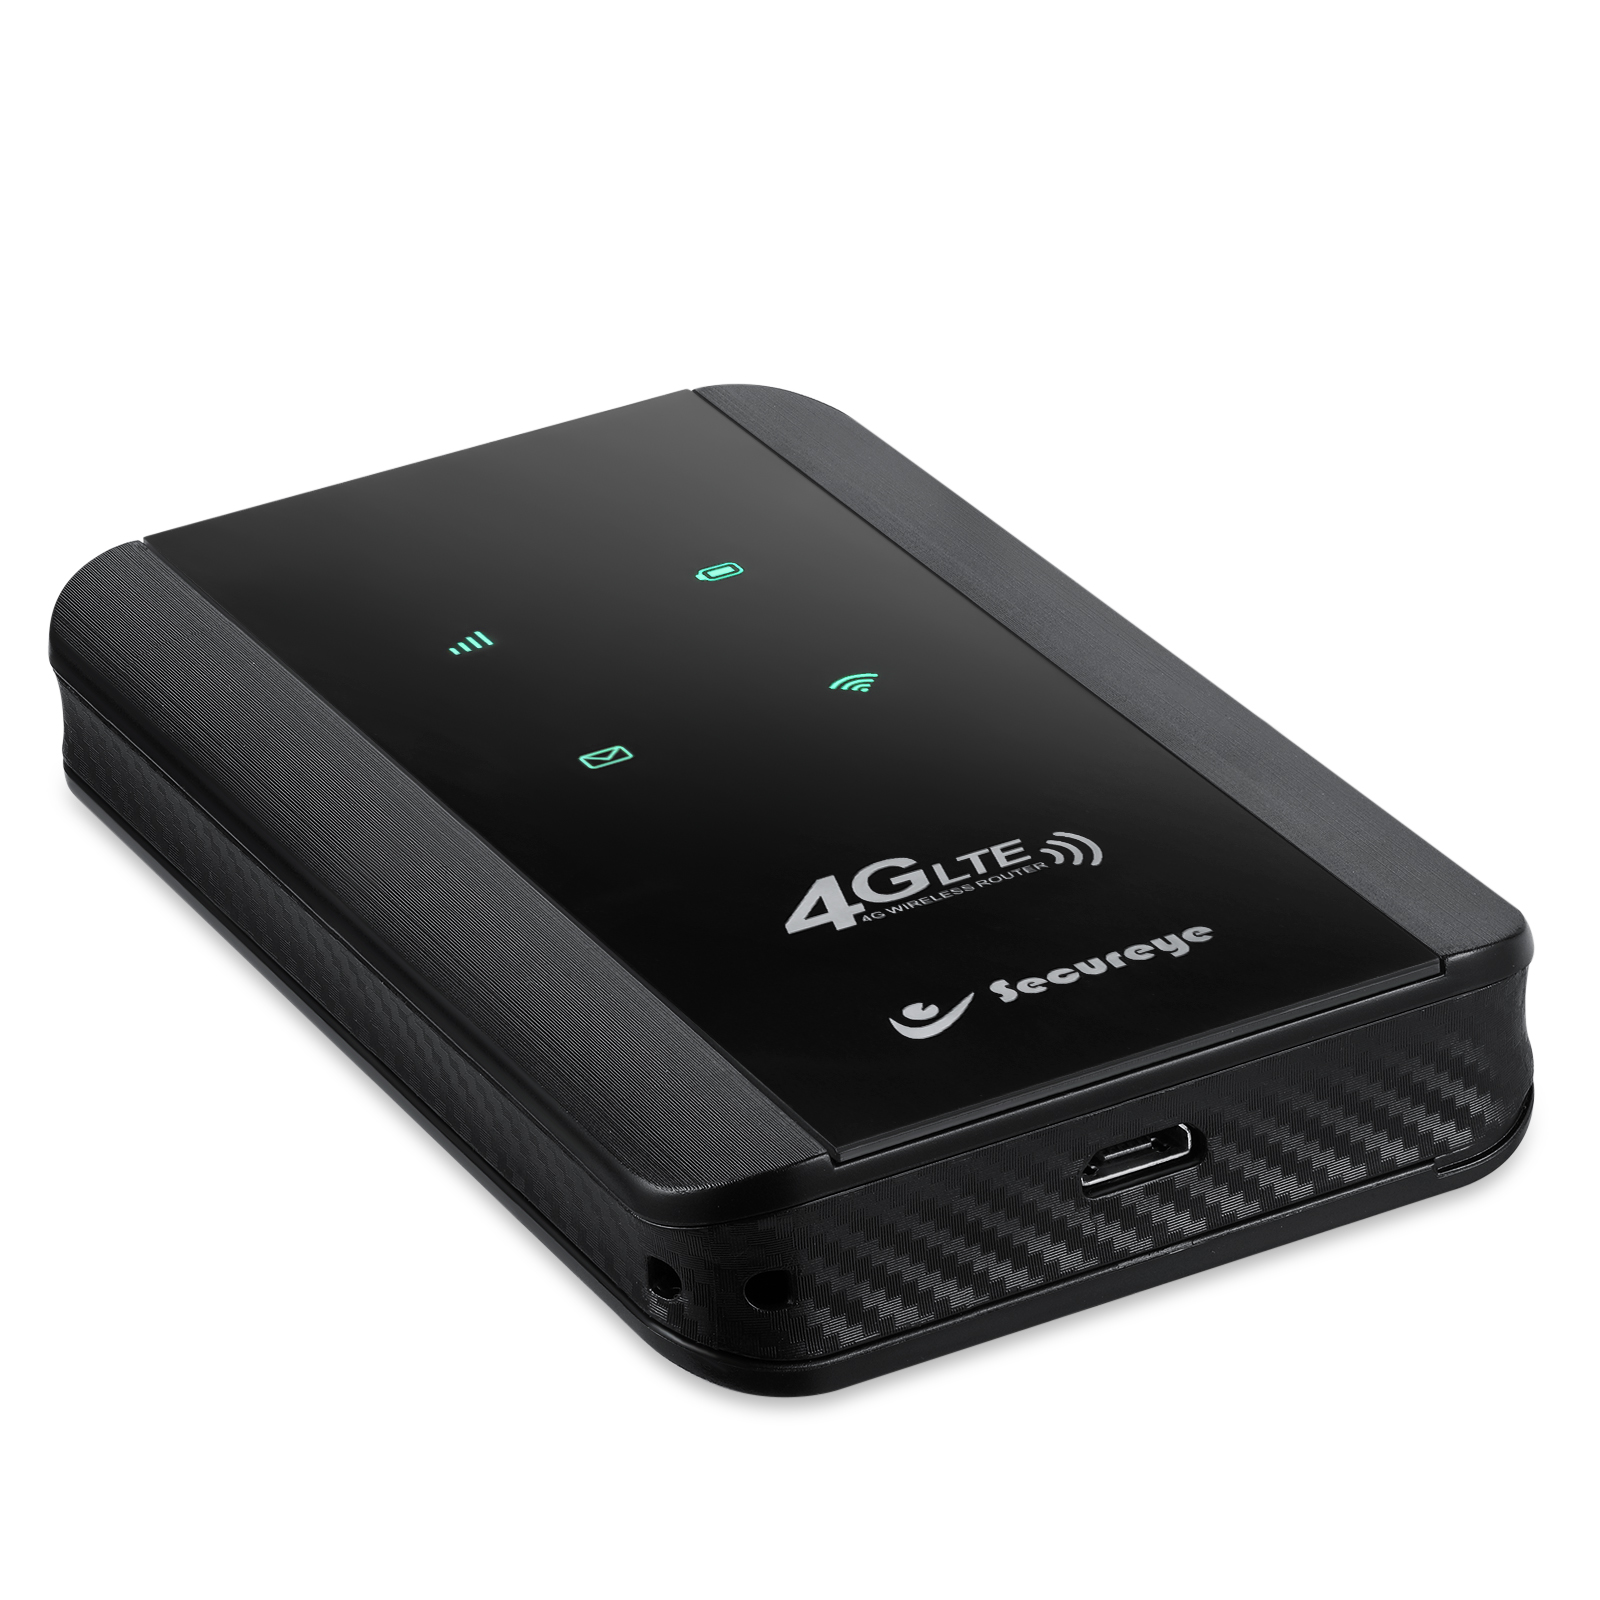 wifi router image